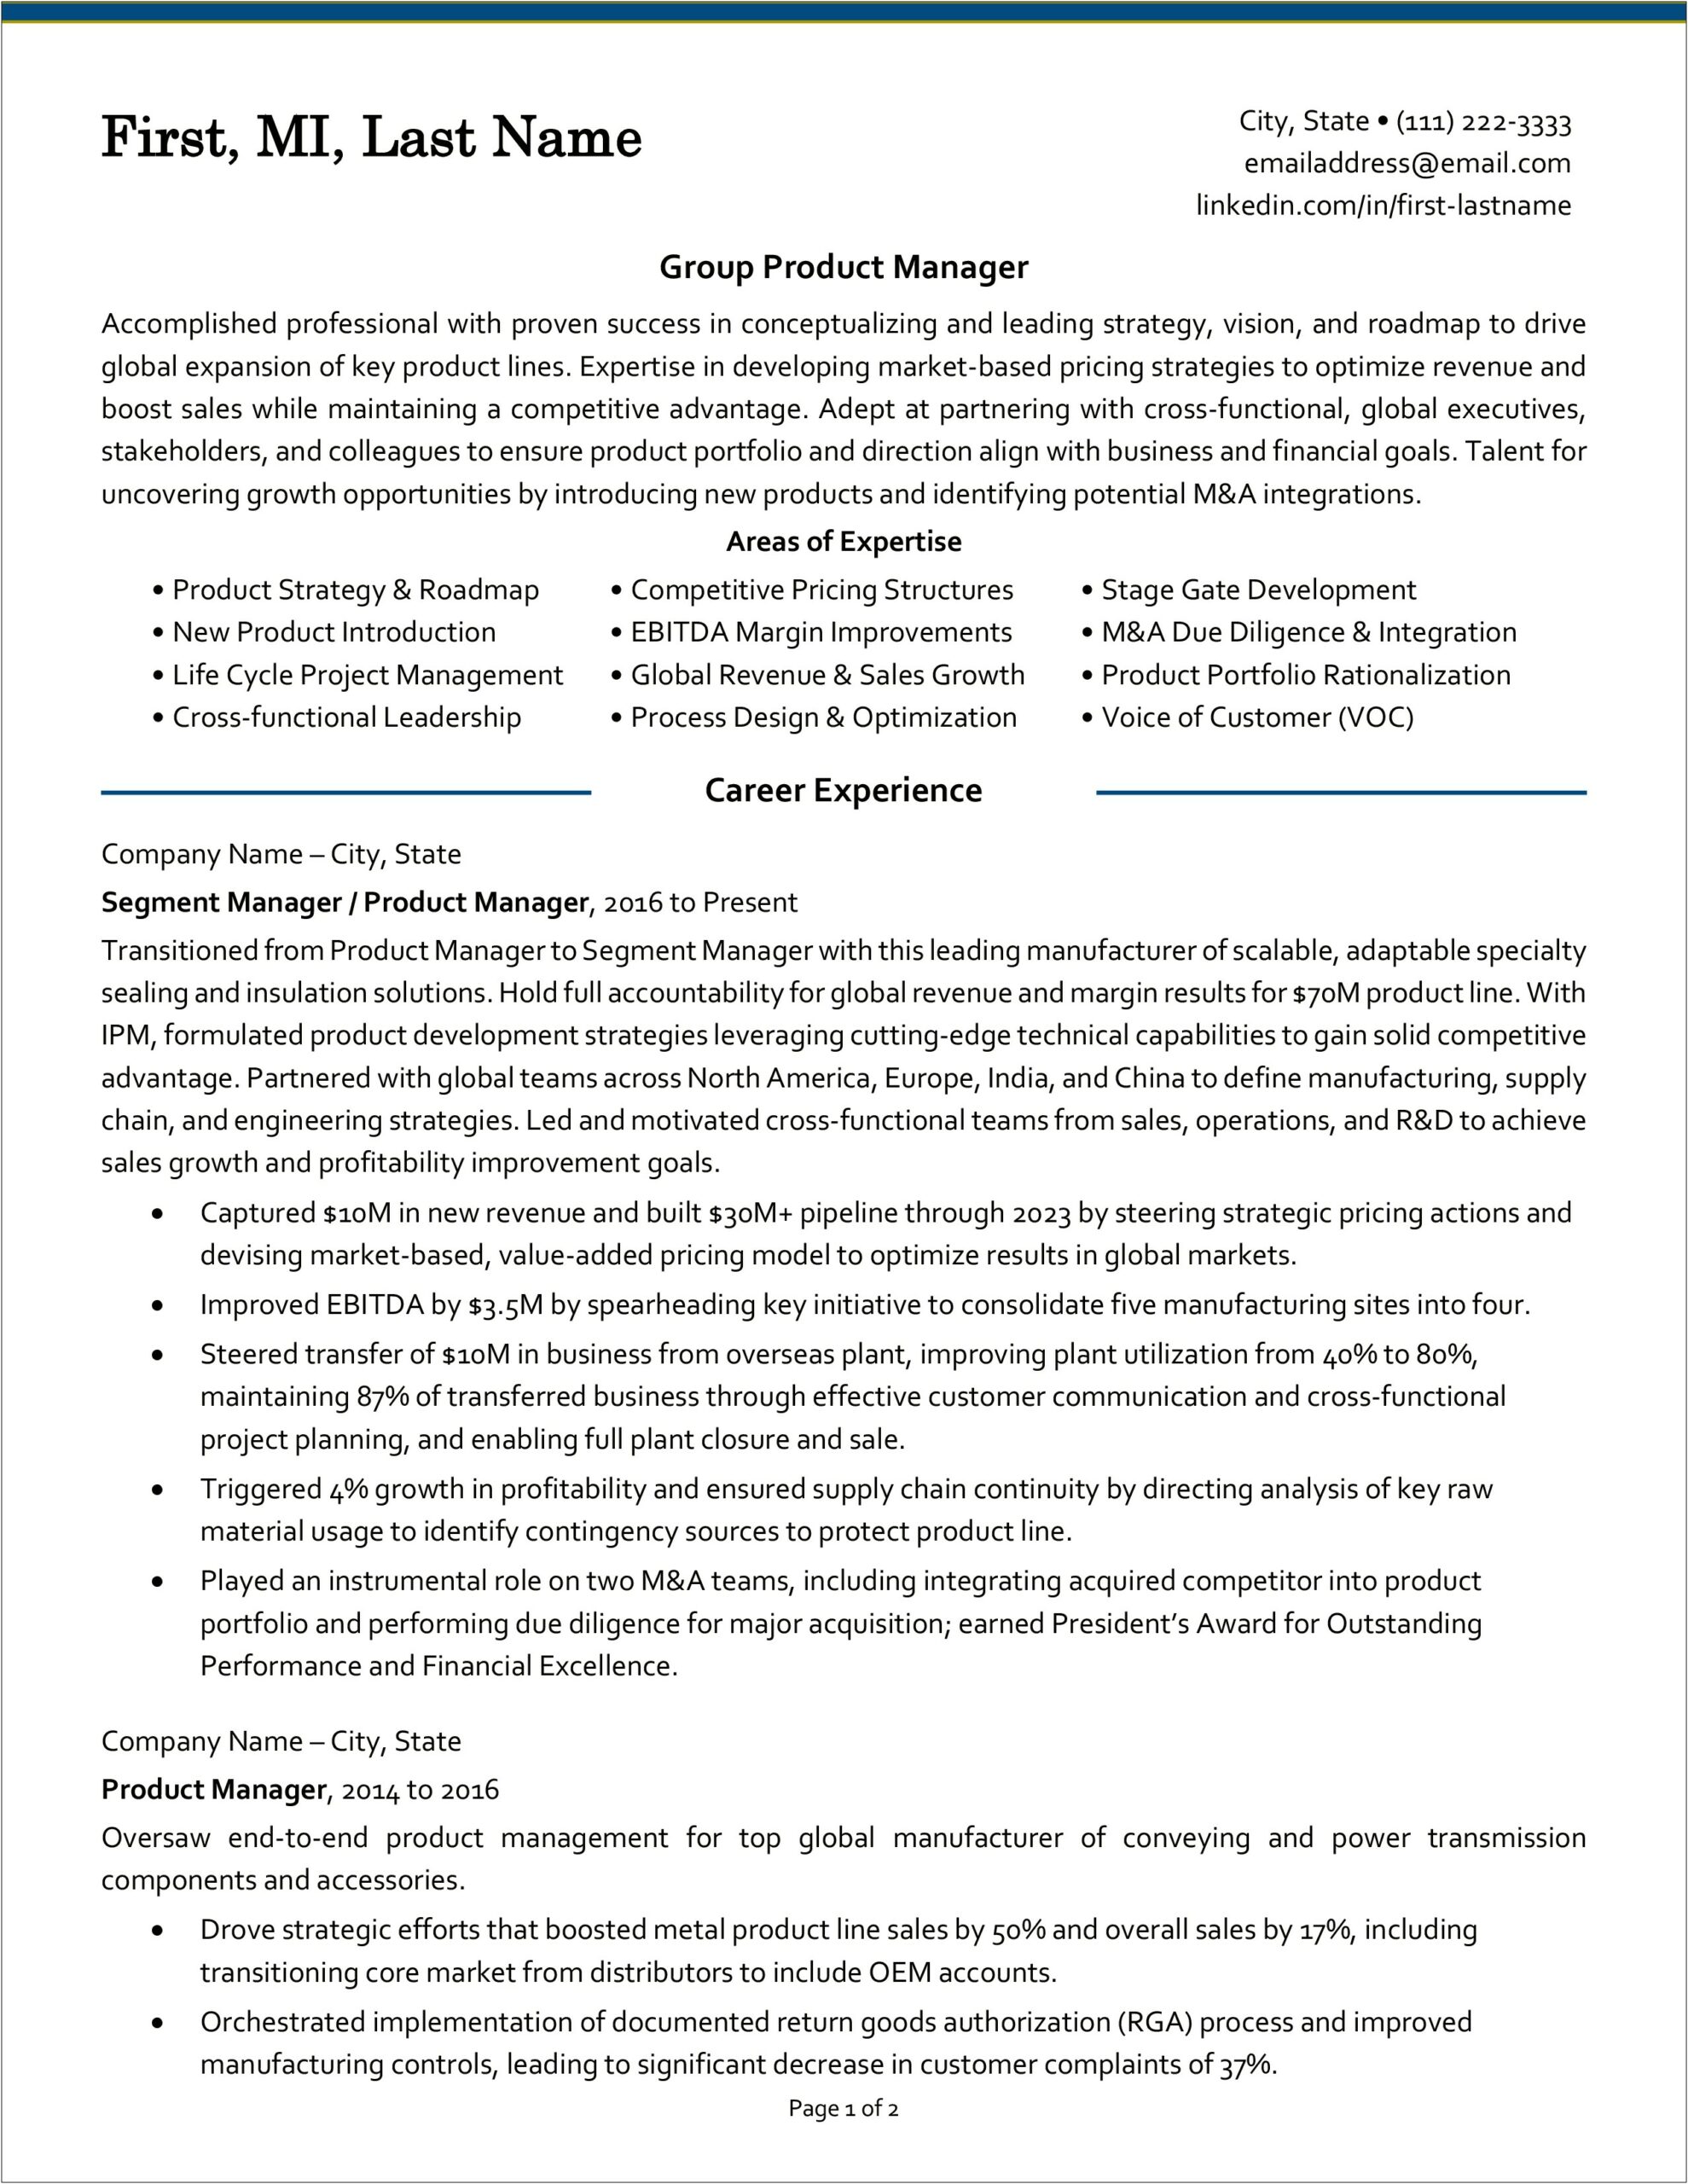 Resume Examples For Jobs Skils